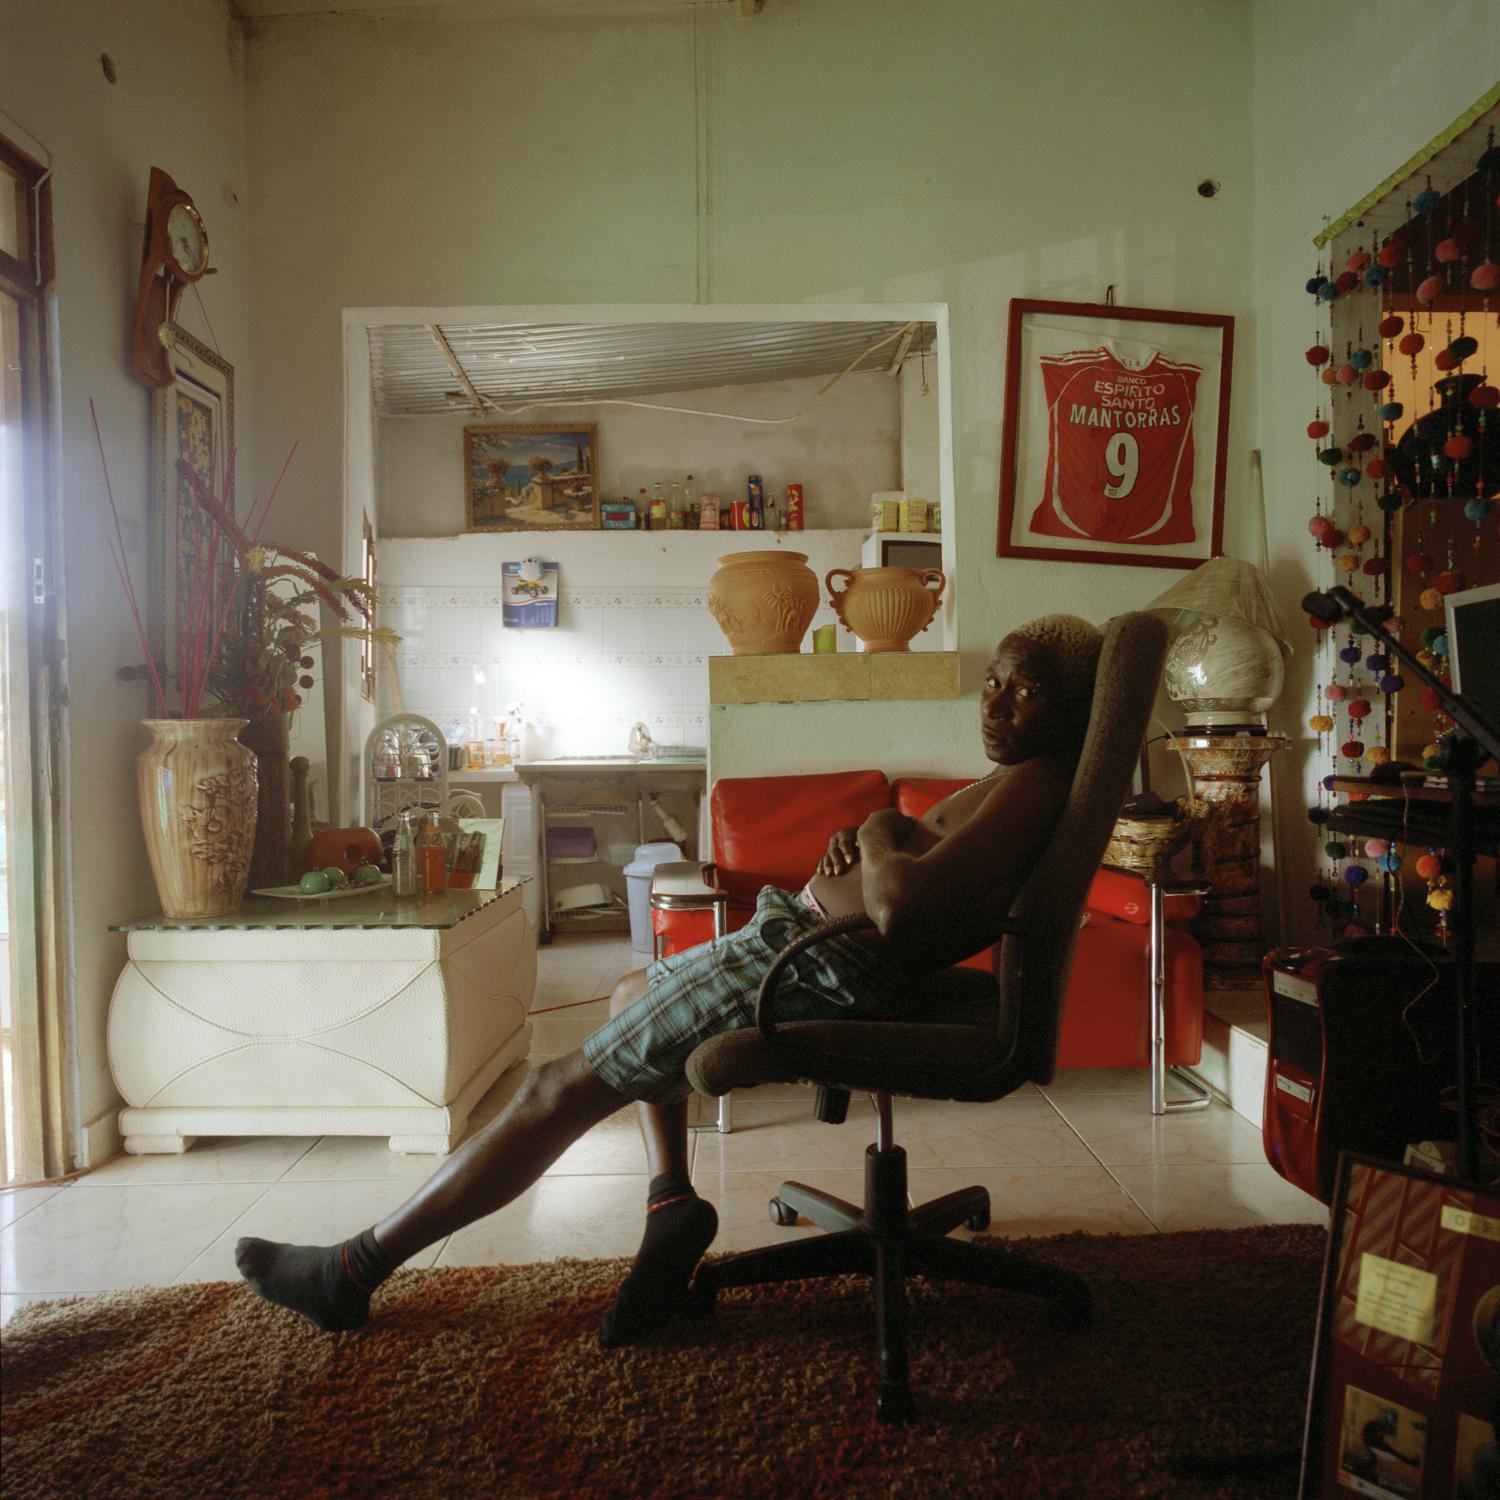 Kuduro star Sebem at his home in Luanda, the capital of Angola. Kuduro, originally a rhythm from the guetos of Luanda, is the most popular music among young Angolans